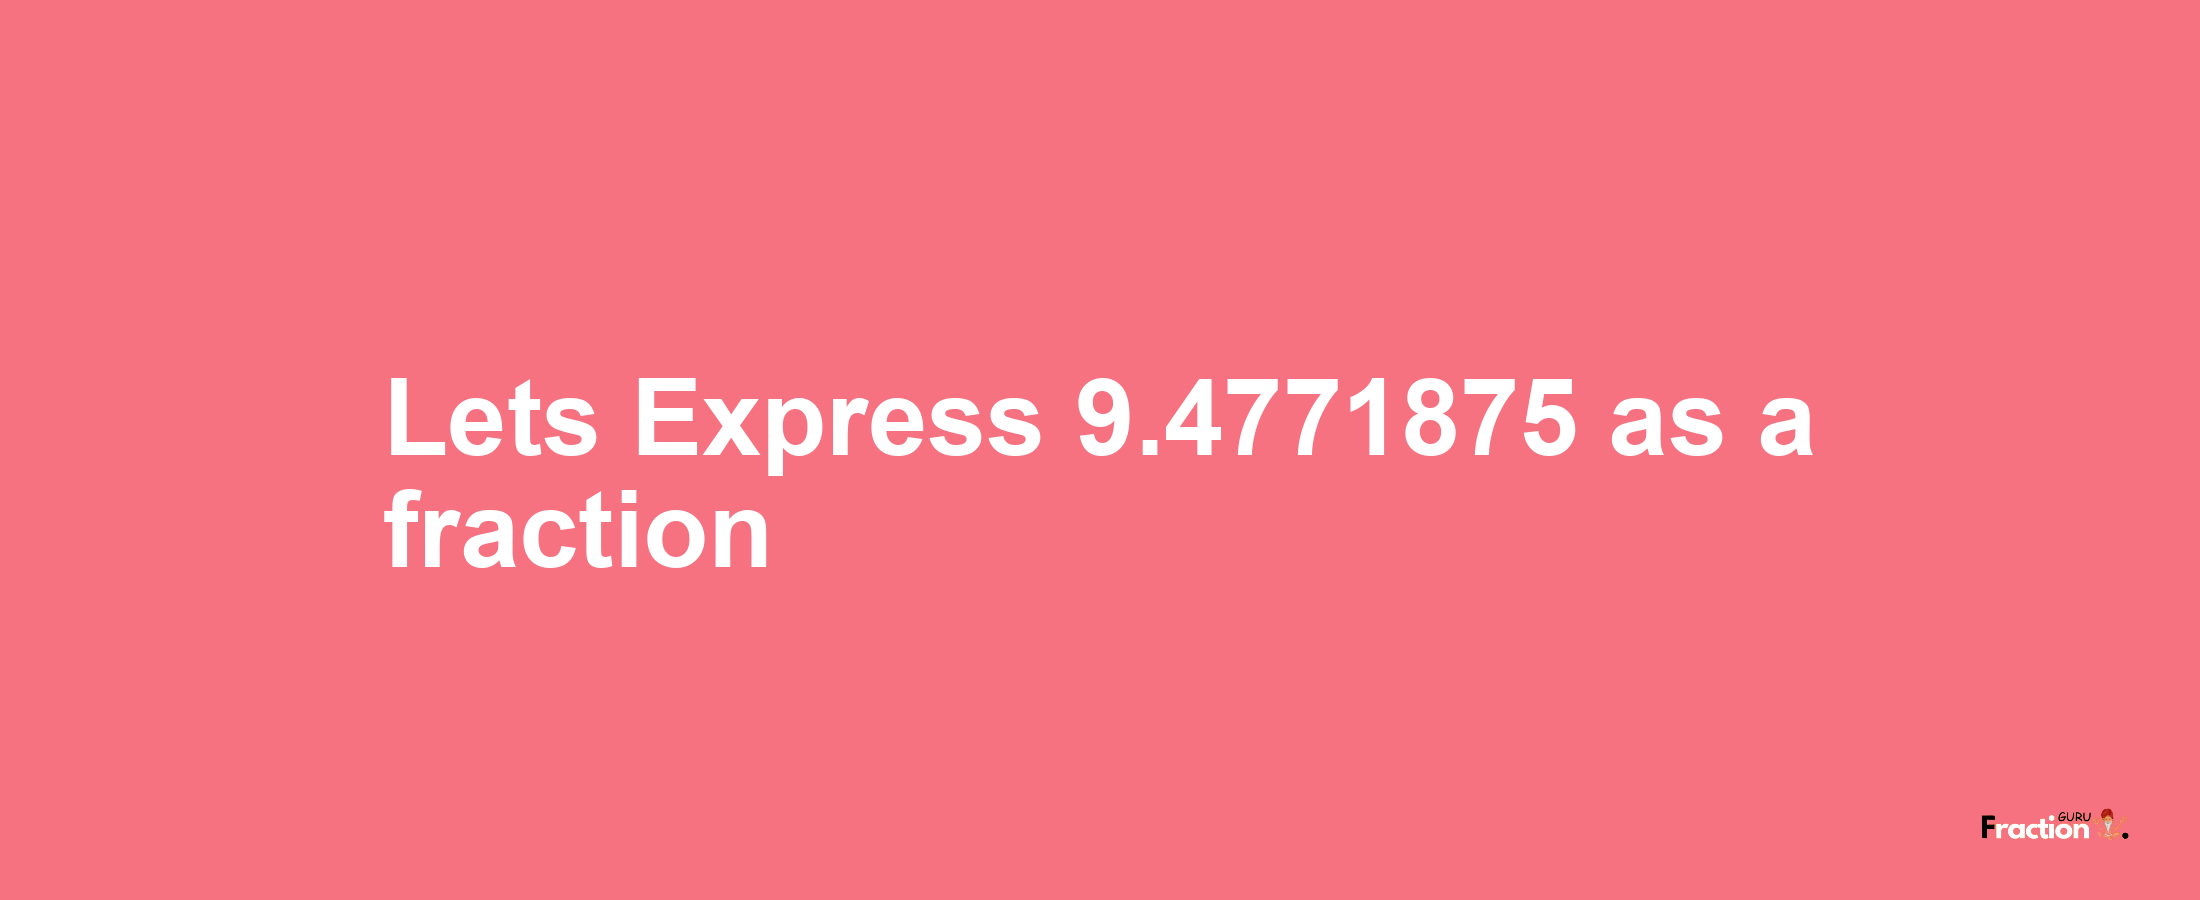 Lets Express 9.4771875 as afraction